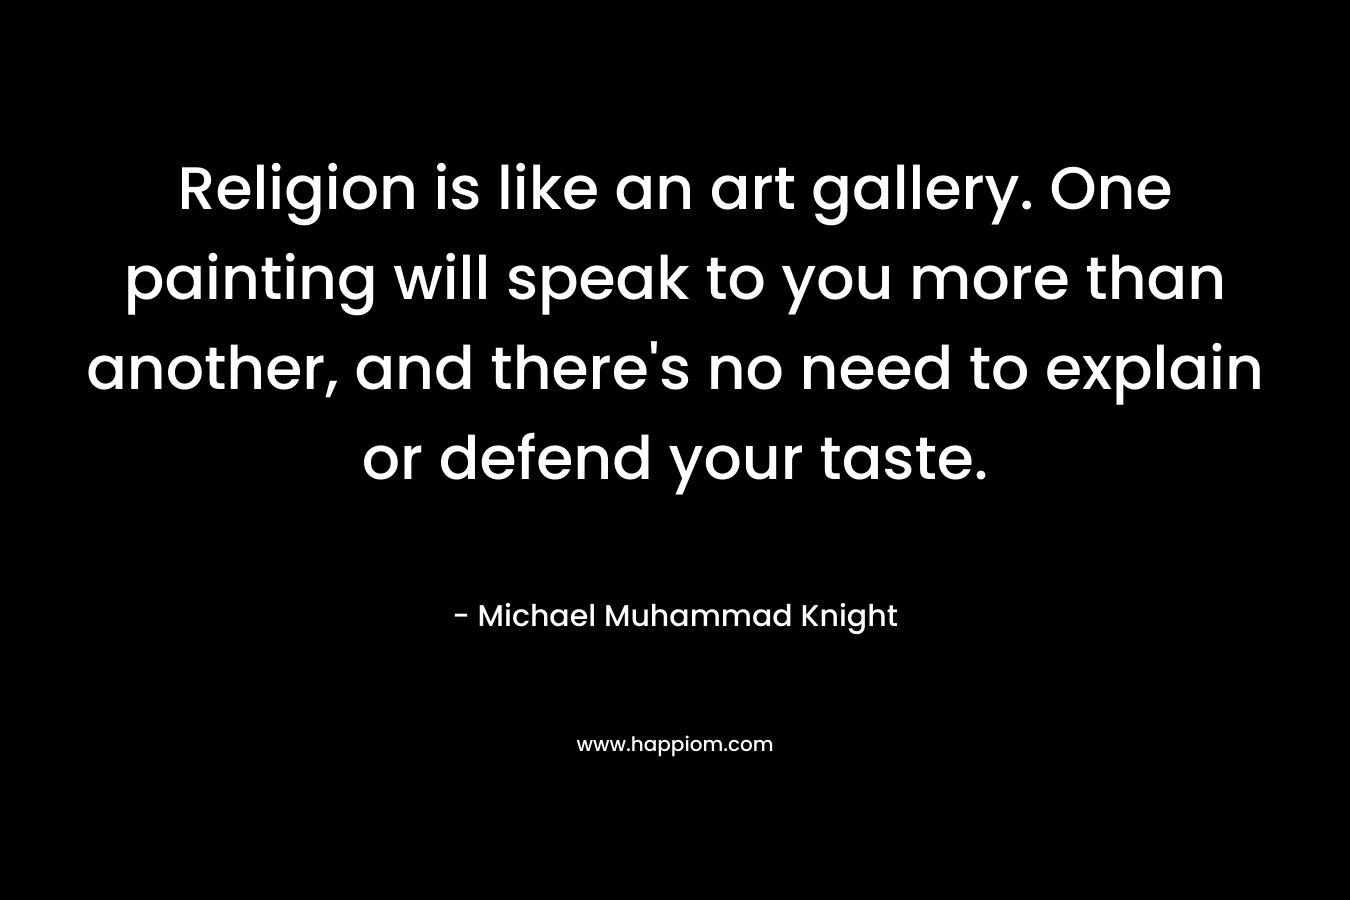 Religion is like an art gallery. One painting will speak to you more than another, and there’s no need to explain or defend your taste. – Michael Muhammad Knight